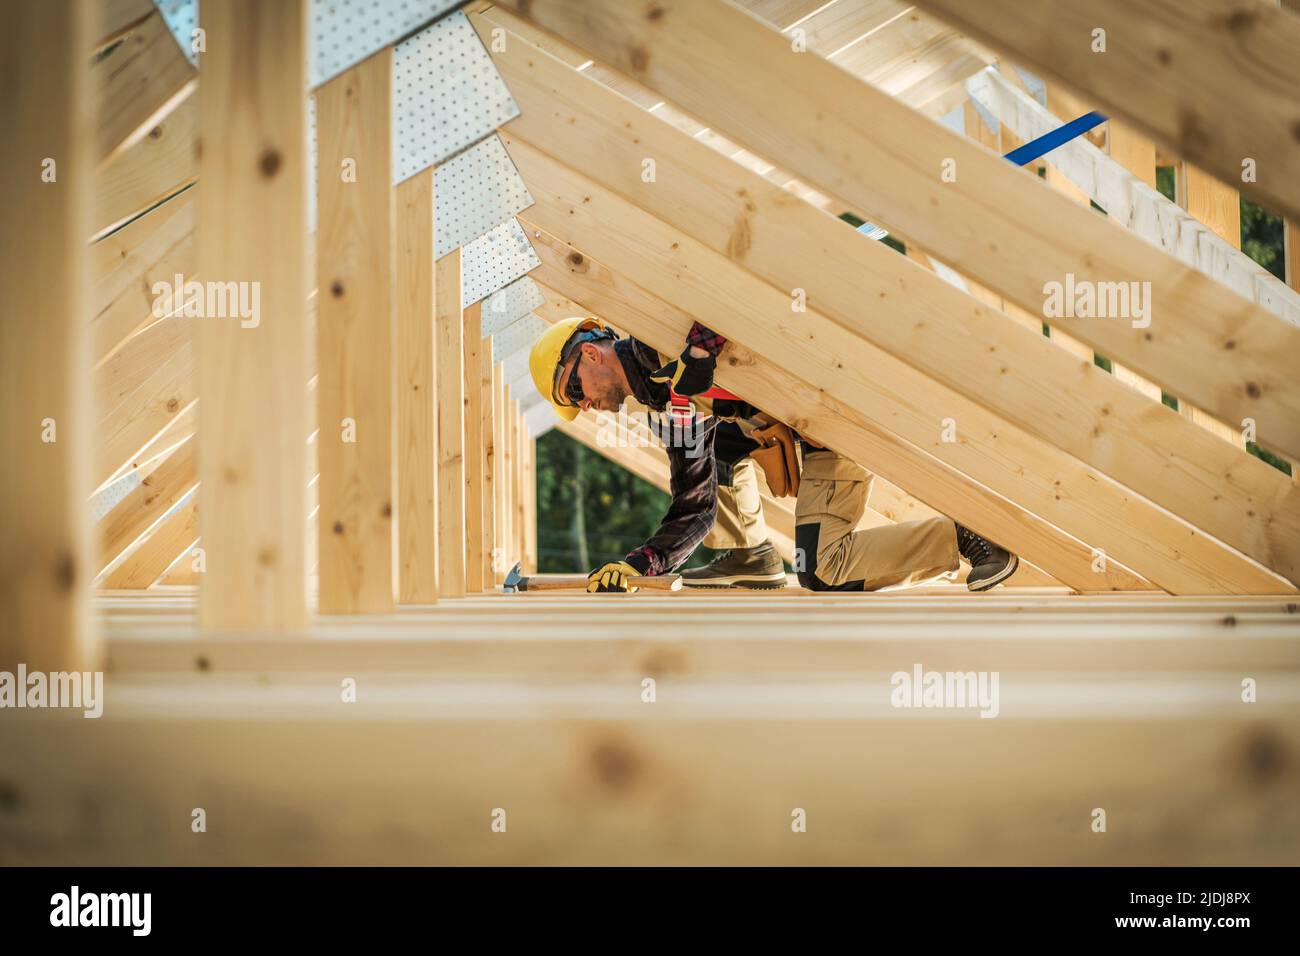 Building Process of the Roof Wooden Skeleton in the New Residential House. Caucasian Worker Driving the Nails Into Beams Using His Claw Hammer Constru Stock Photo